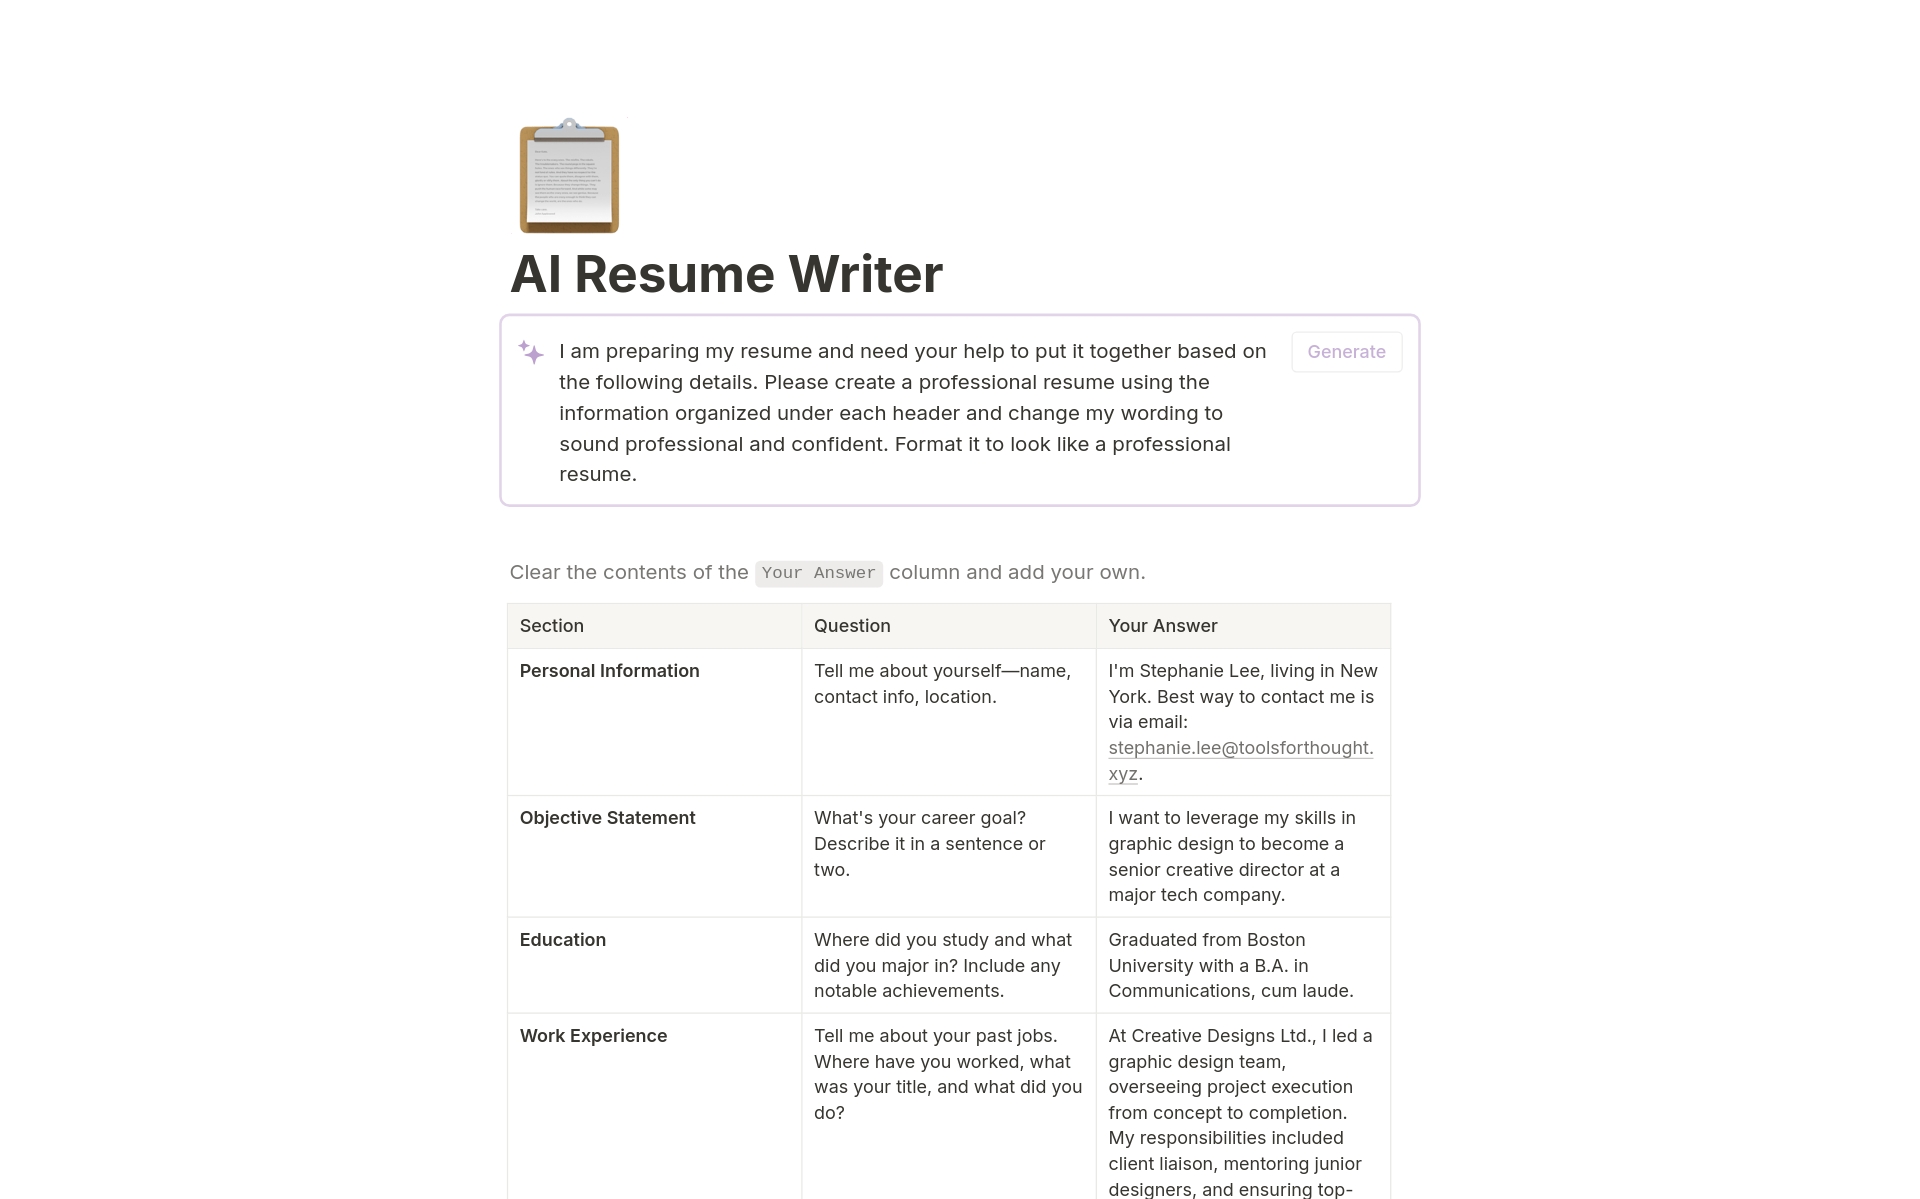 Enhance your job application with Notion AI Resume Writer. Quickly input your career details and let AI transform them into a polished, professional resume tailored to your industry. Perfect for anyone looking to streamline their job search.